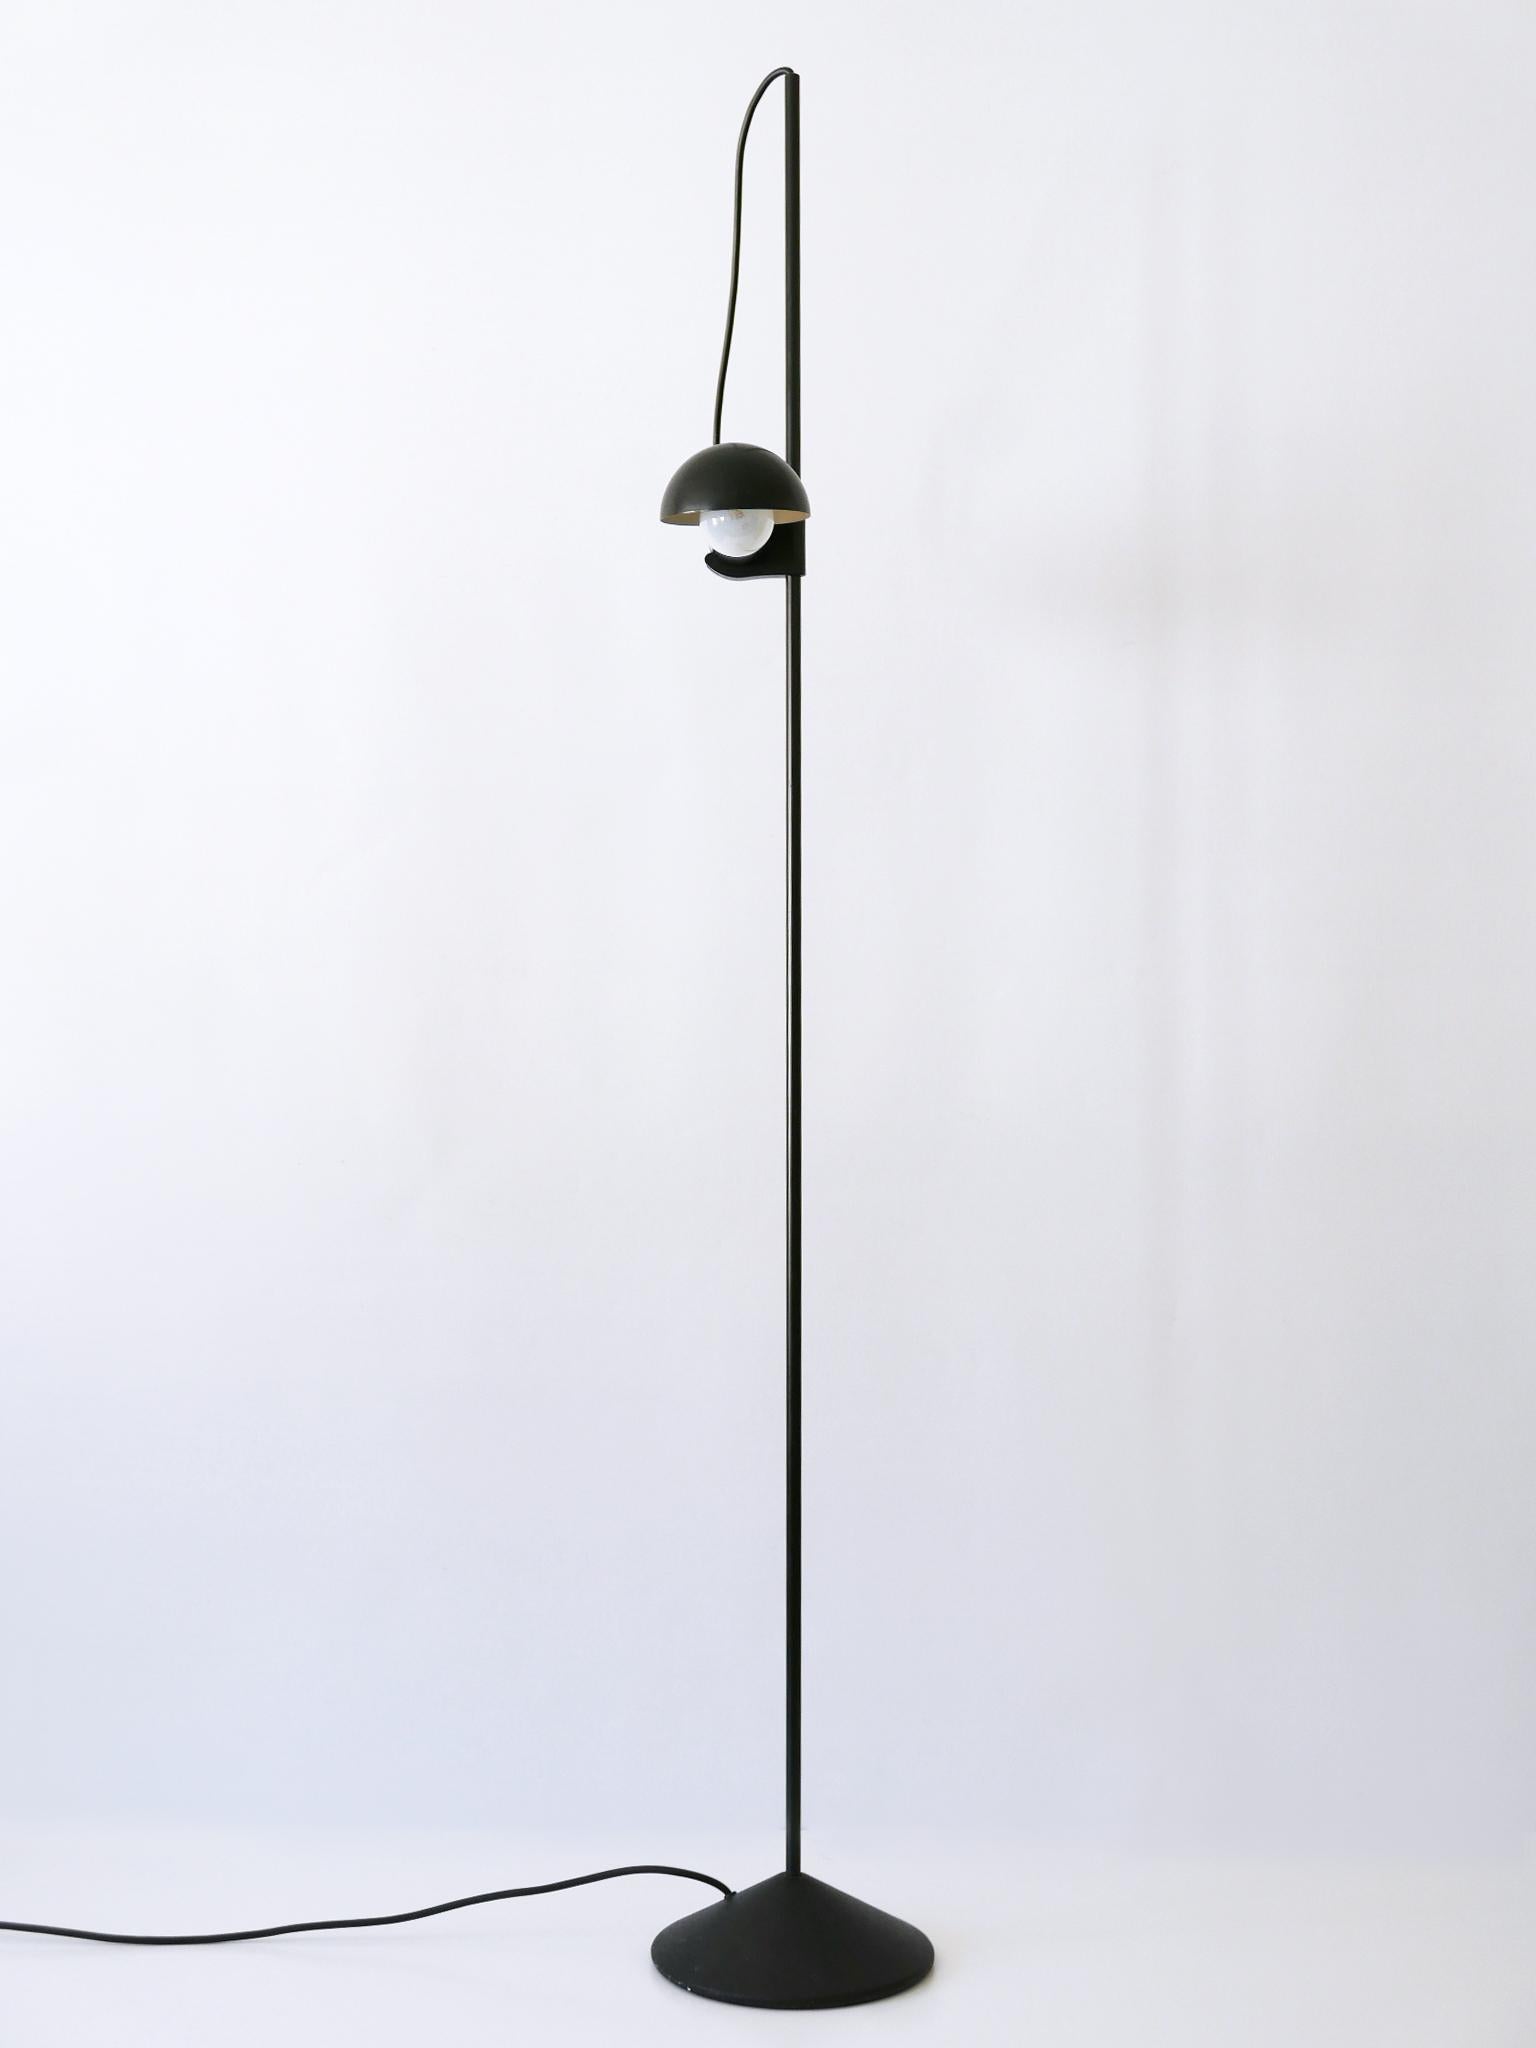 Rare Floor Lamp or Reading Light by Barbieri e Marianelli for Tronconi 1970s For Sale 10